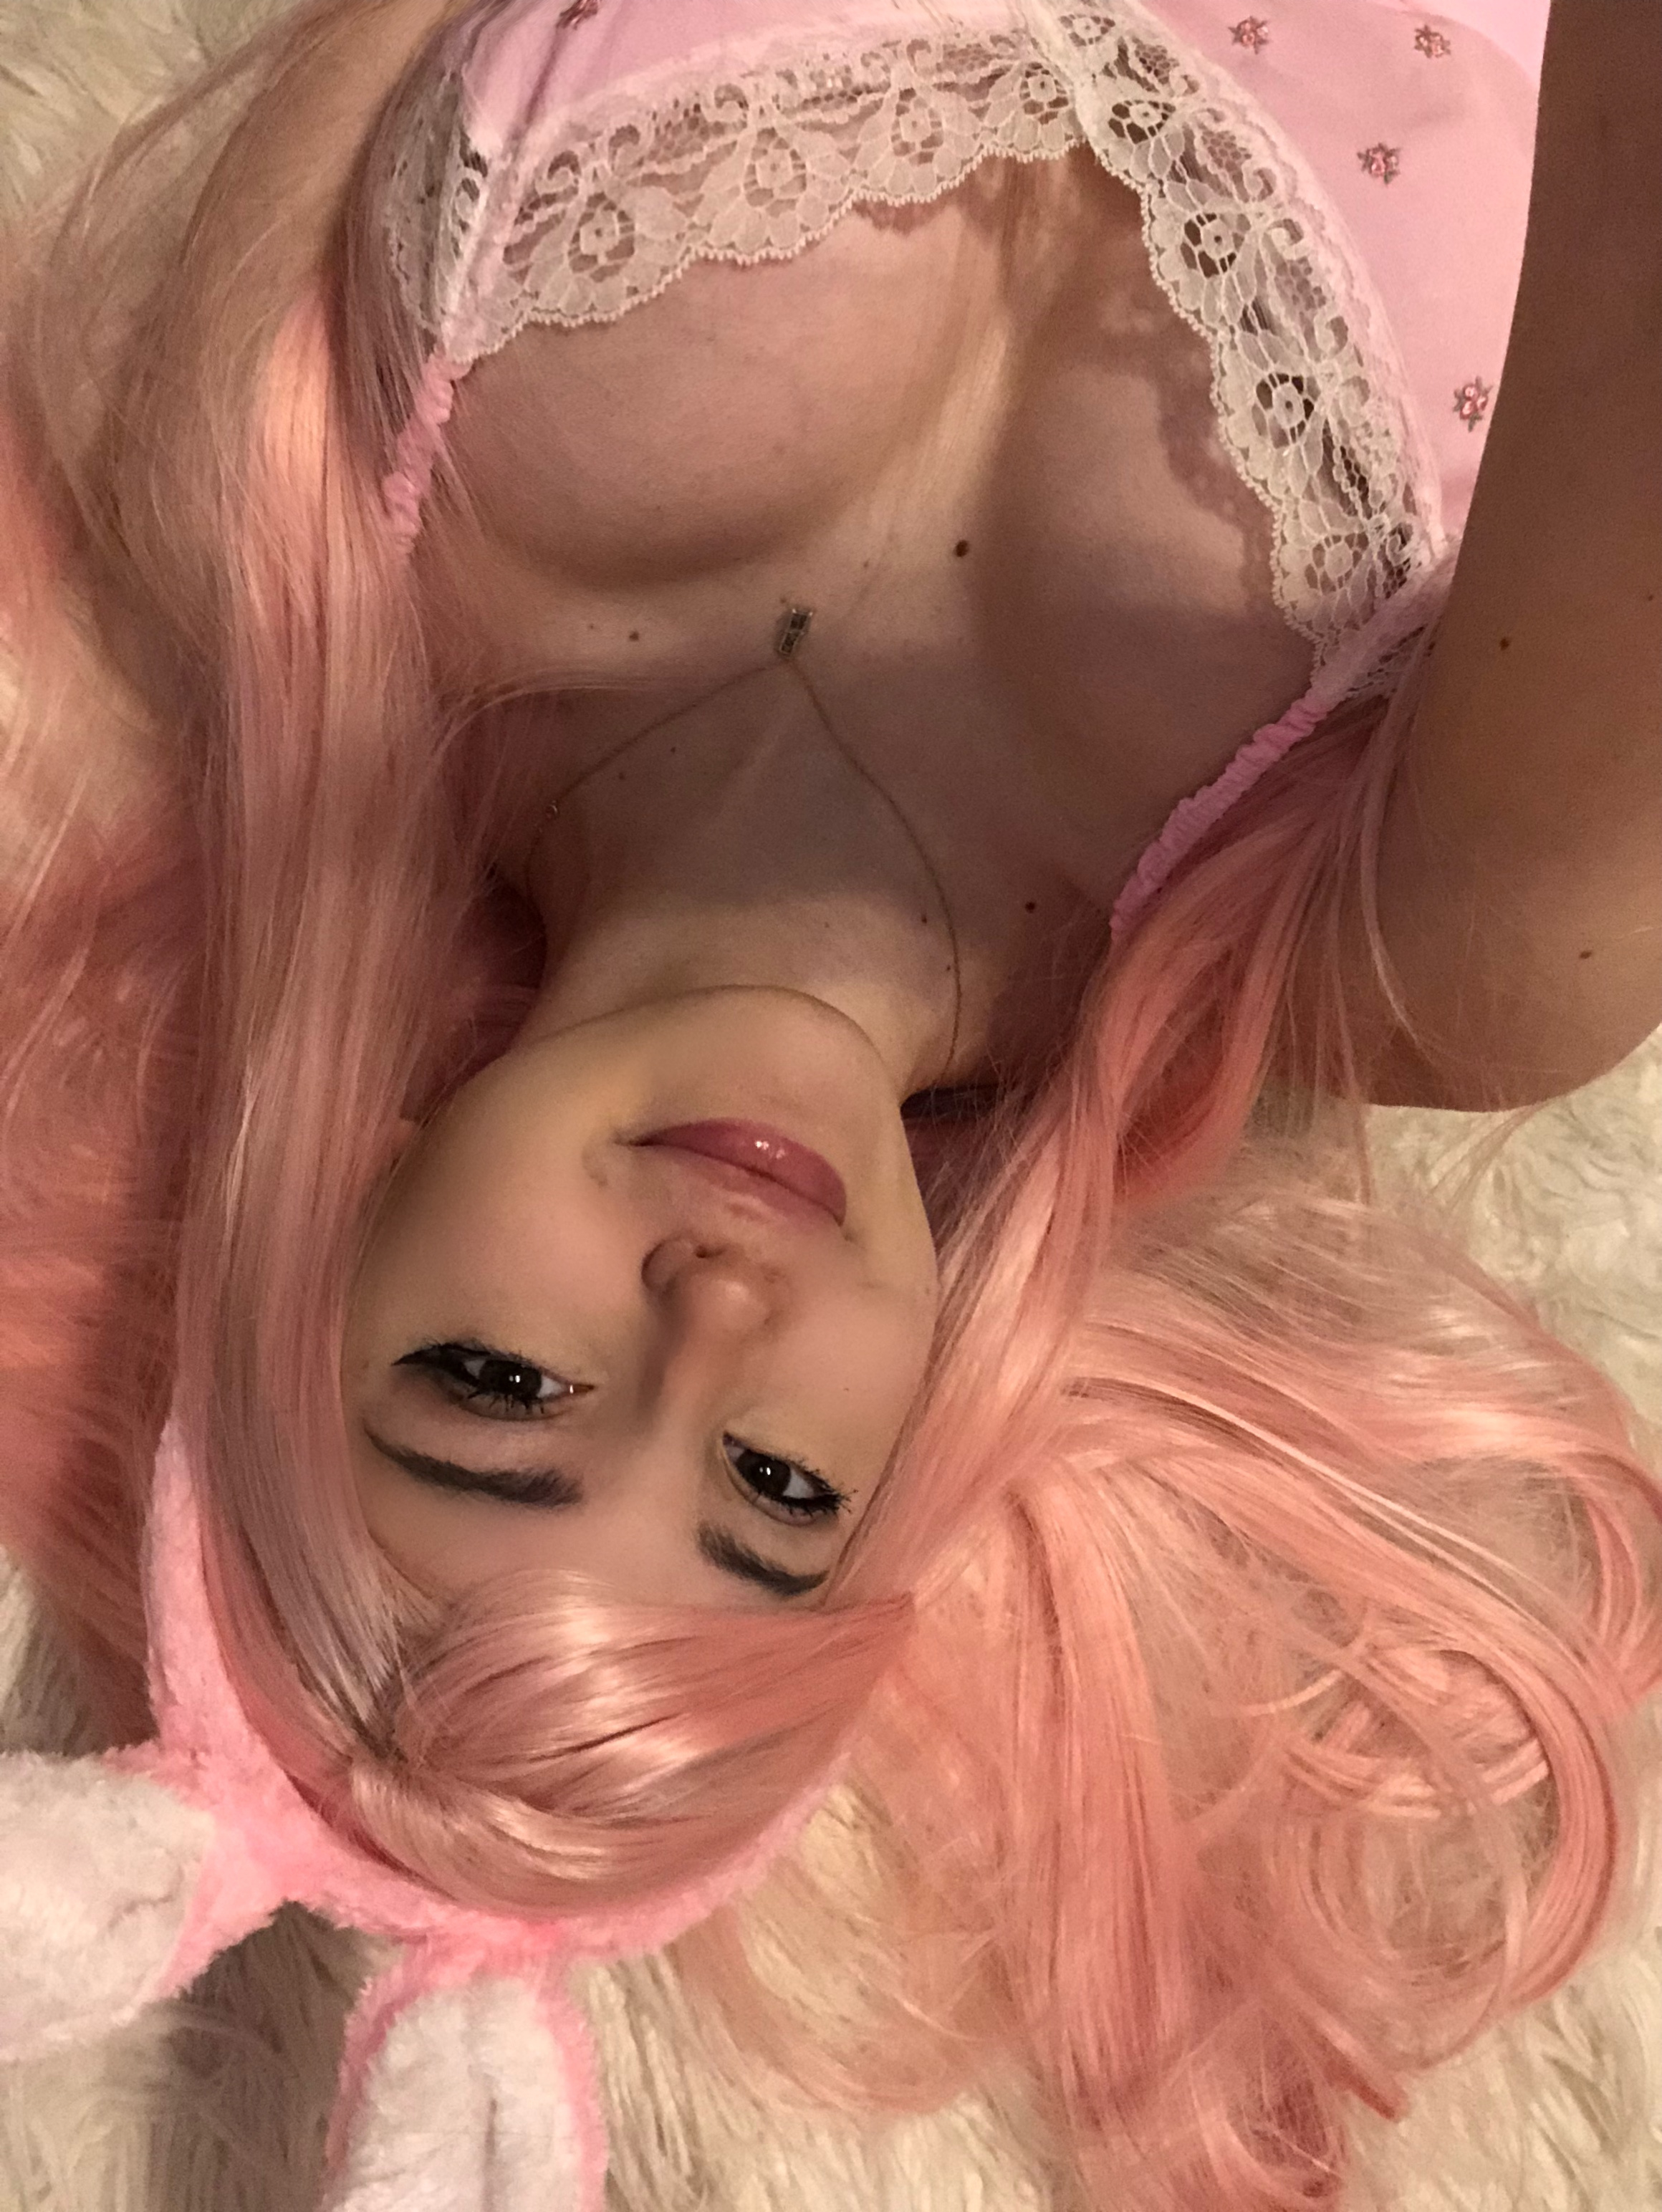 YouTuber Jinx ASMR Shamelessly Showing Off Her Beautiful Breasts.